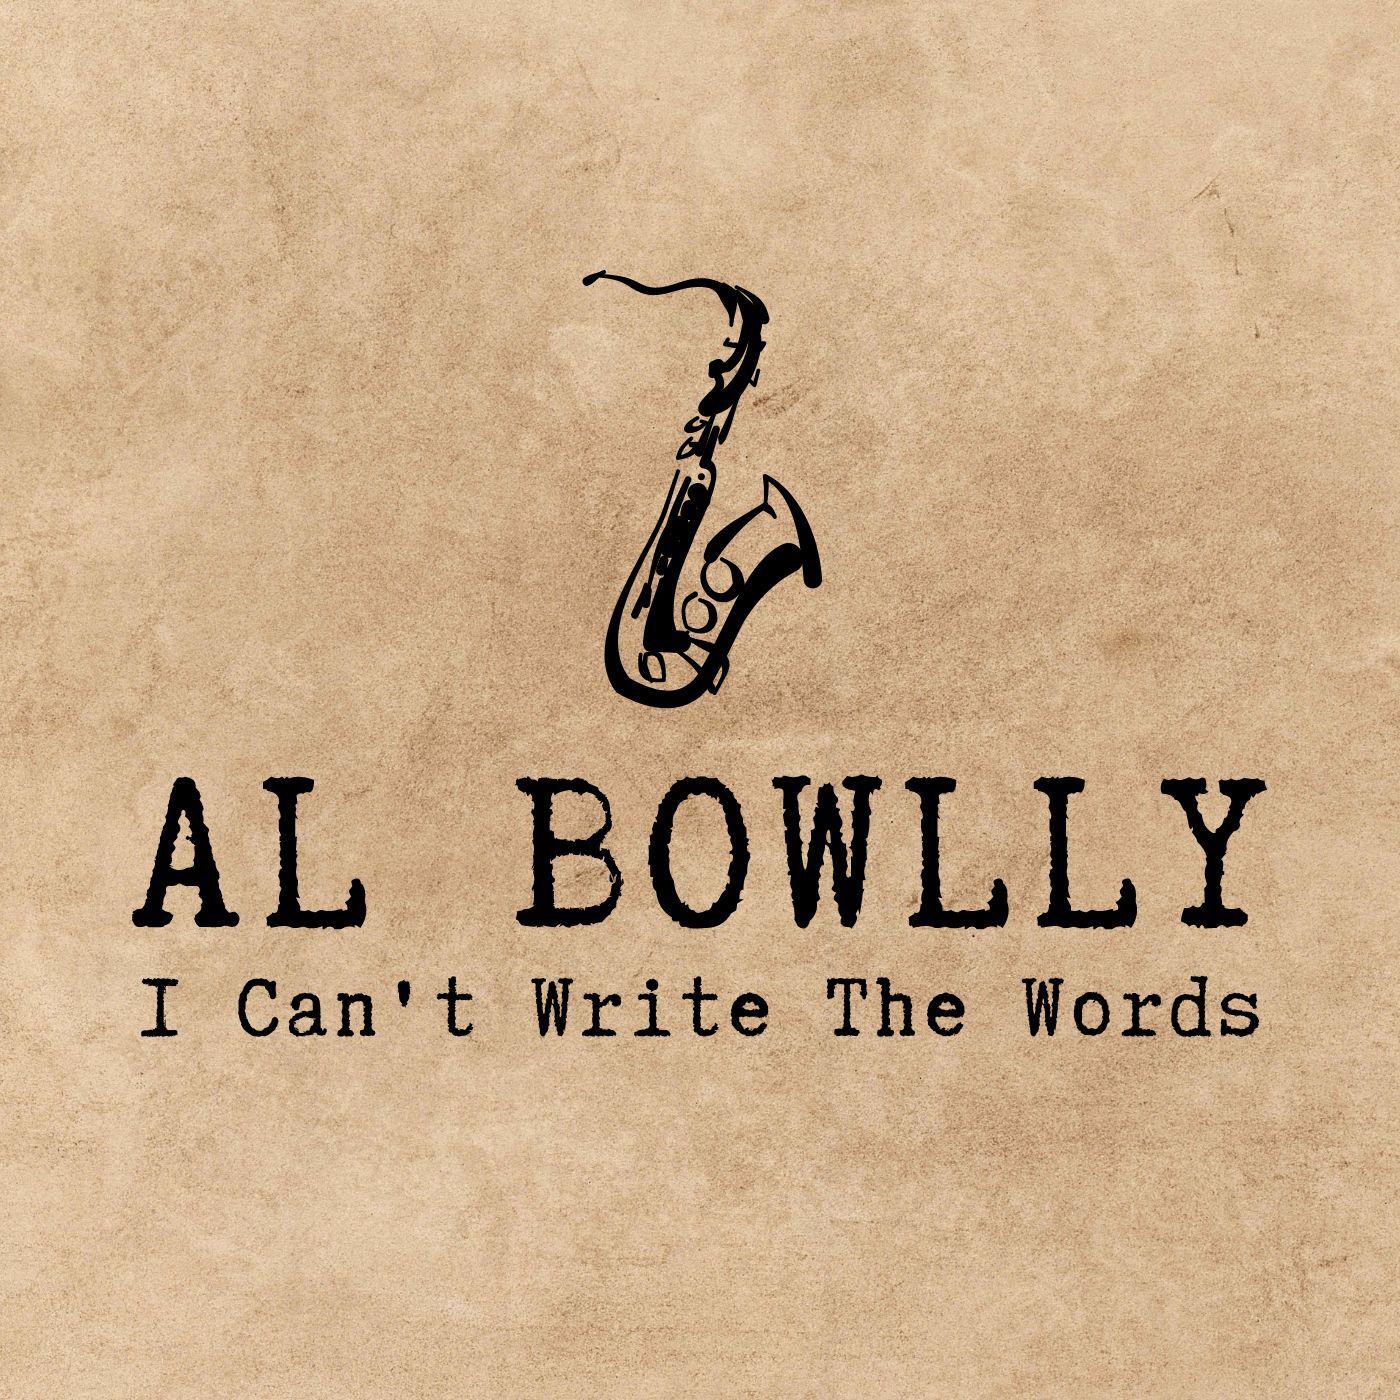 Al Bowlly - Let Me Give My Happiness To You